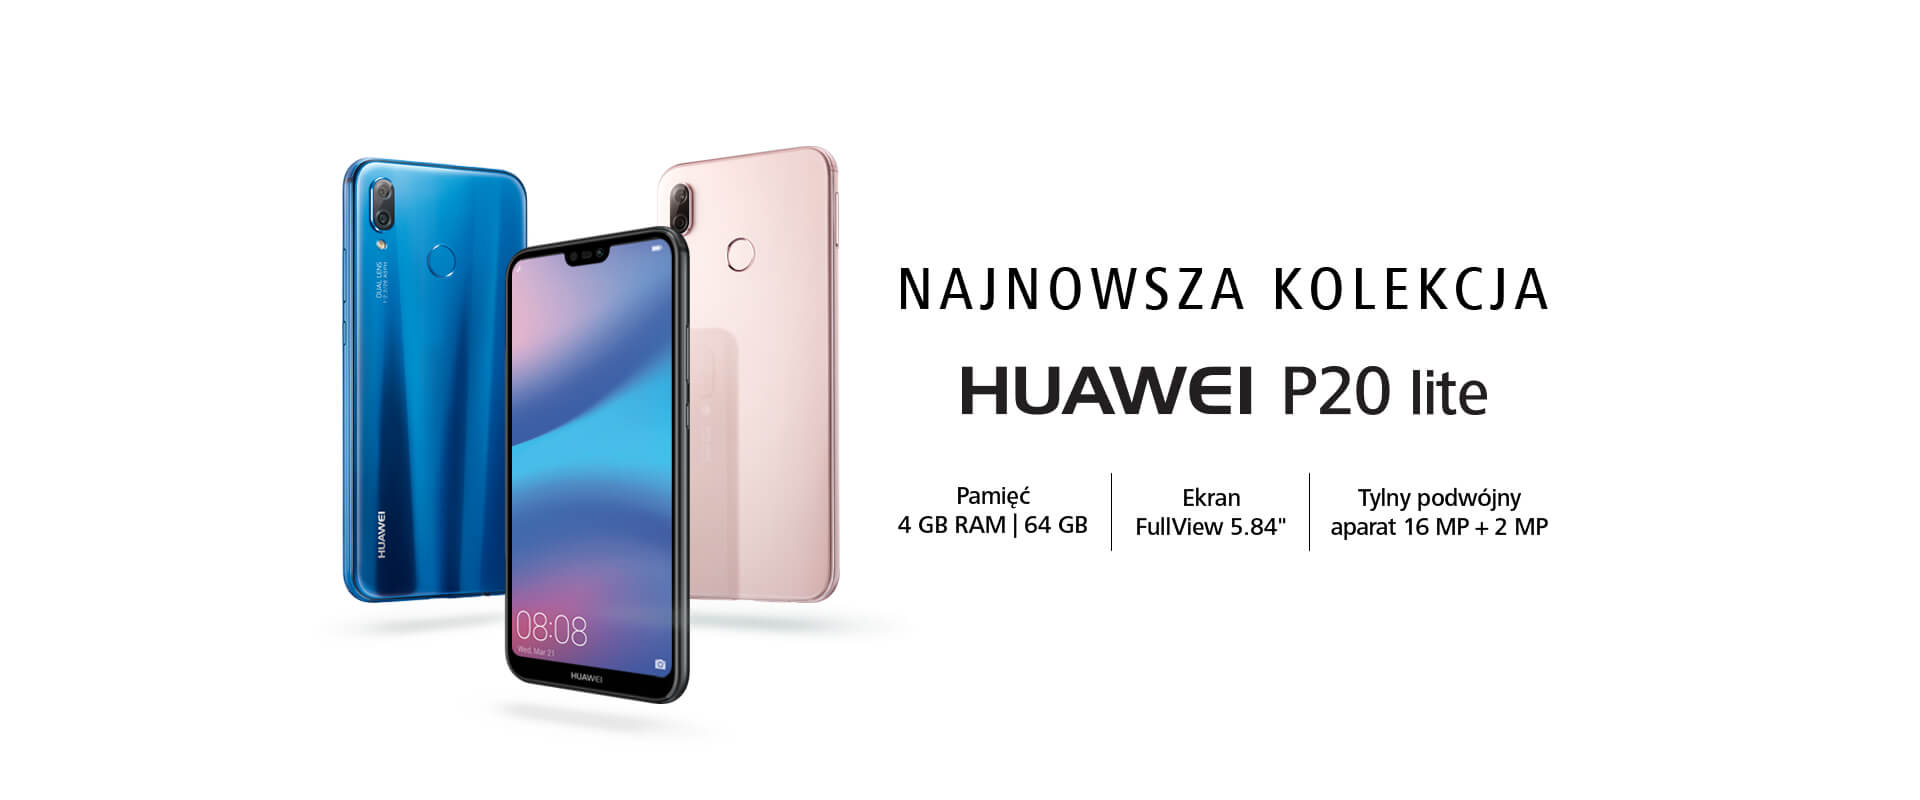 Huawei P20 lite - Full phone specifications